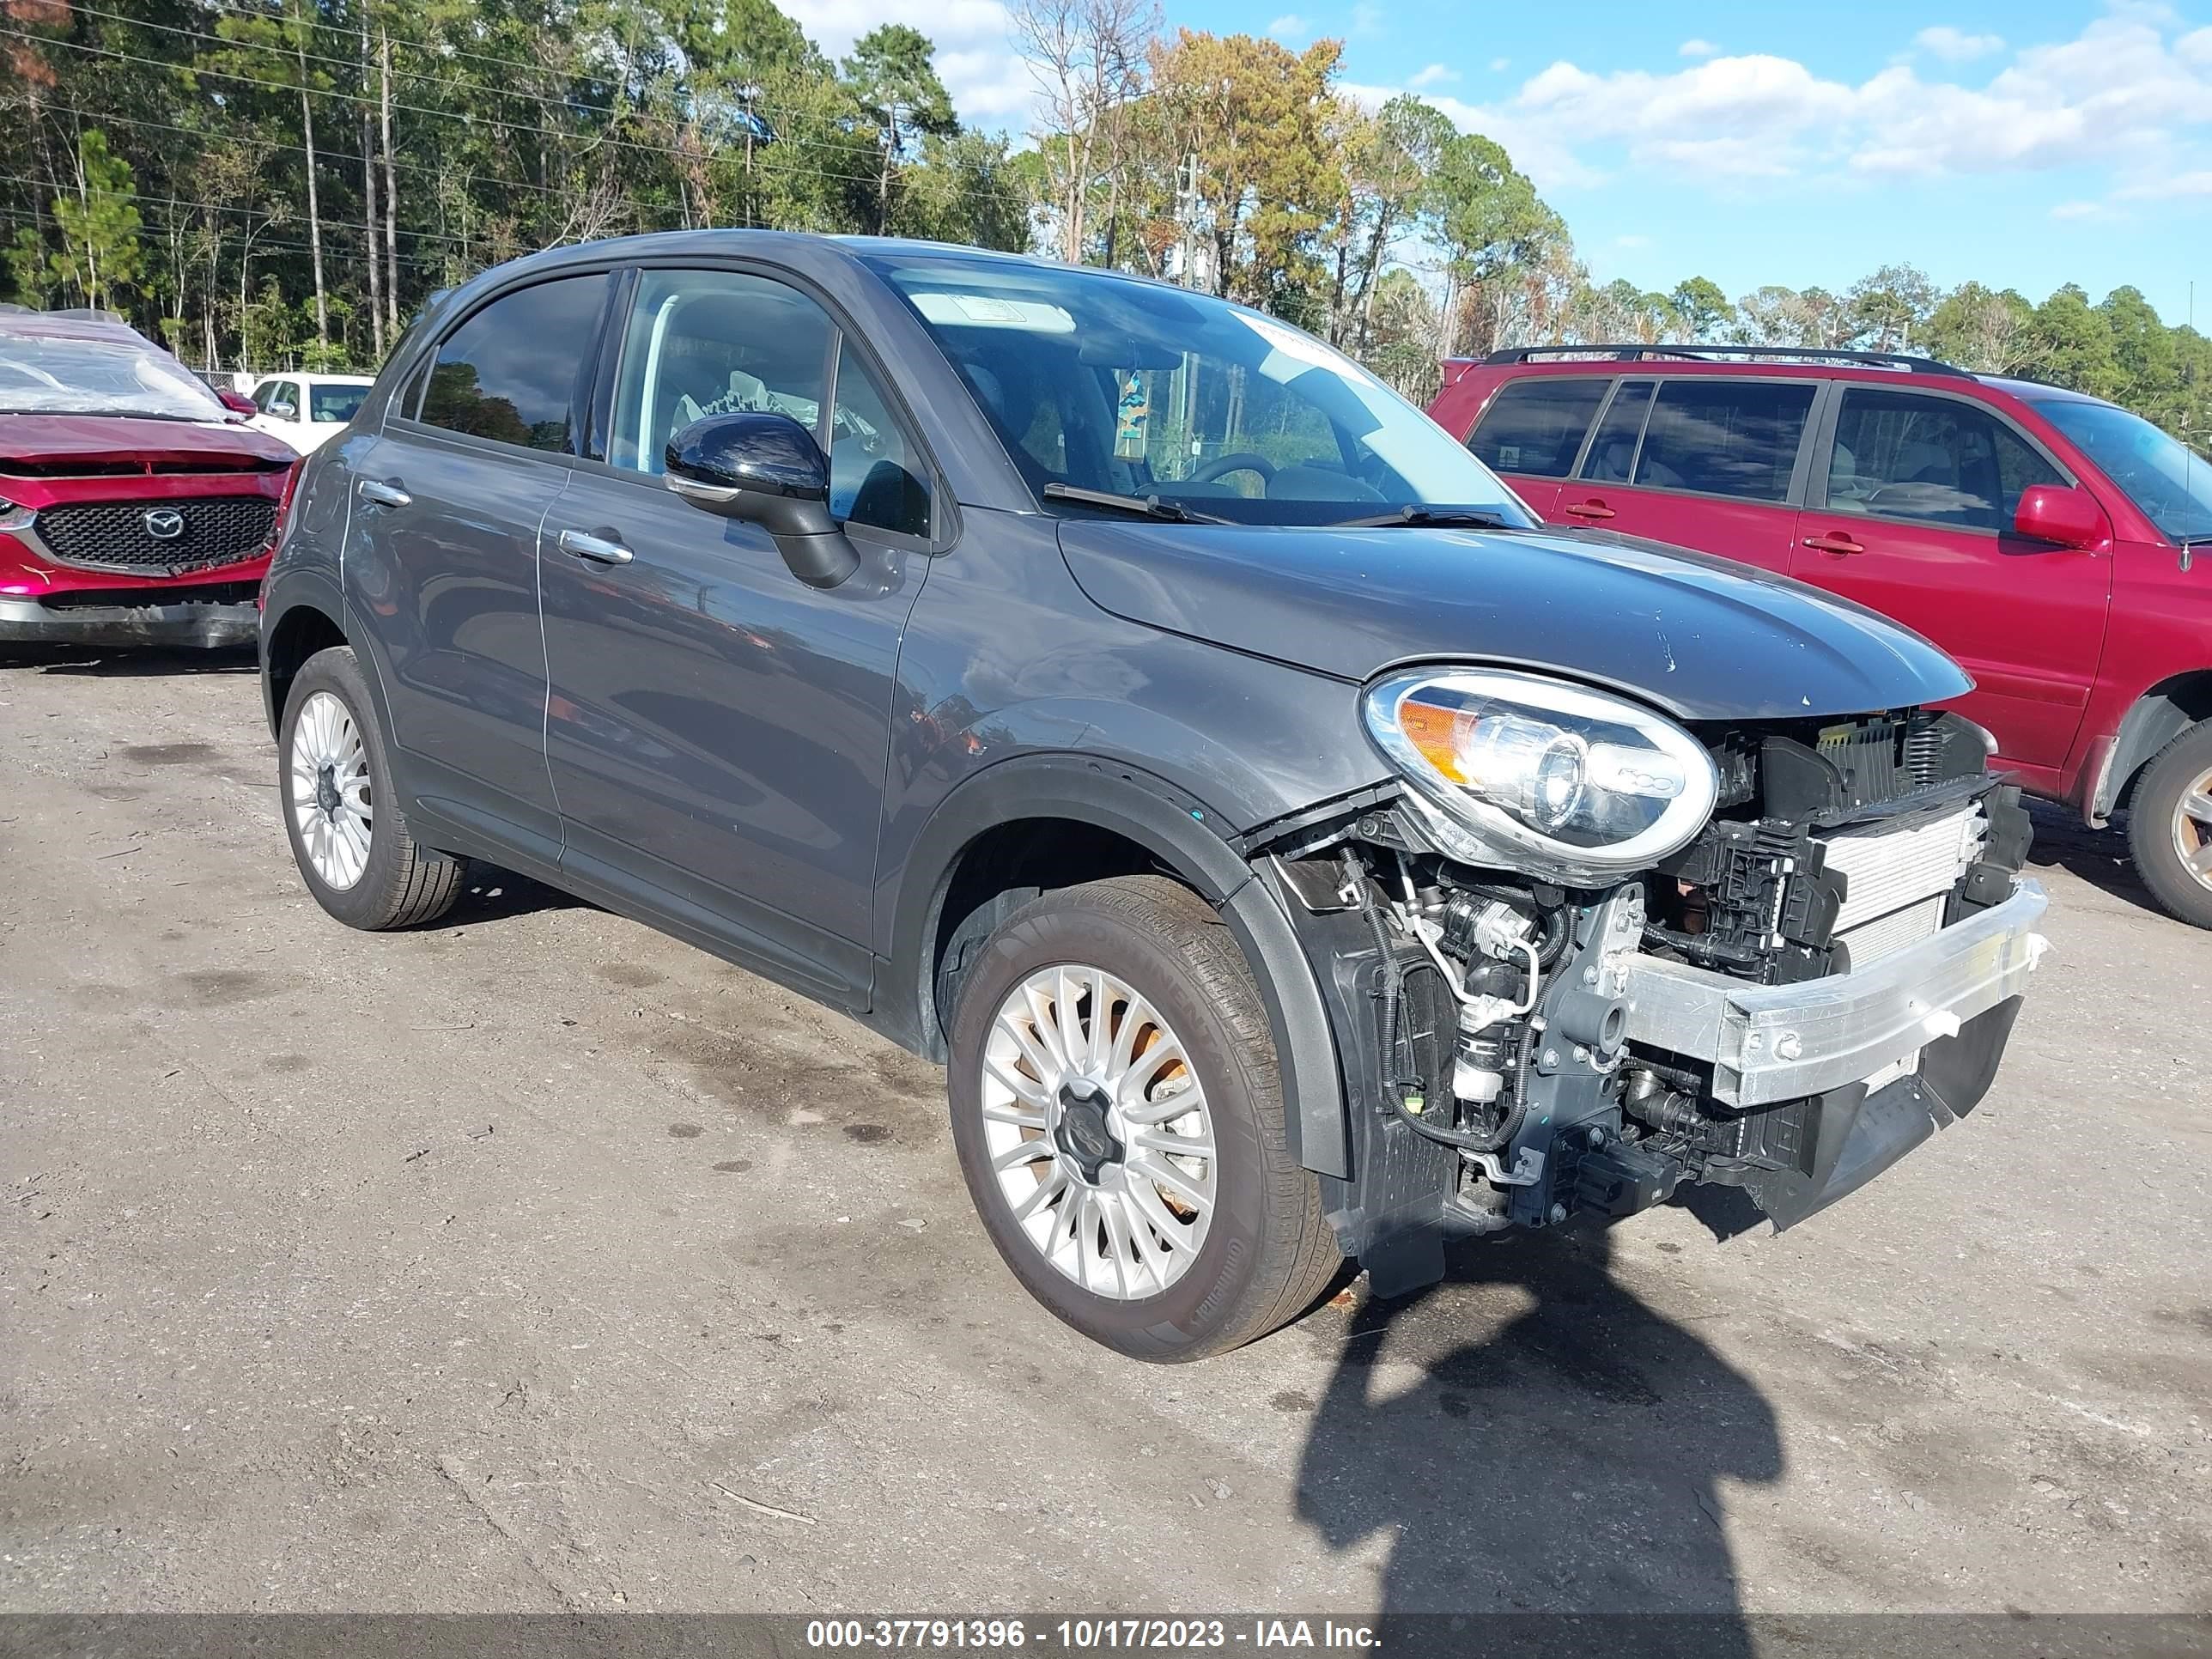 vin: ZFBNF3A17NP973424 ZFBNF3A17NP973424 2022 fiat 500x 1300 for Sale in 32218, 186 Pecan Park Rd, Jacksonville, Florida, USA